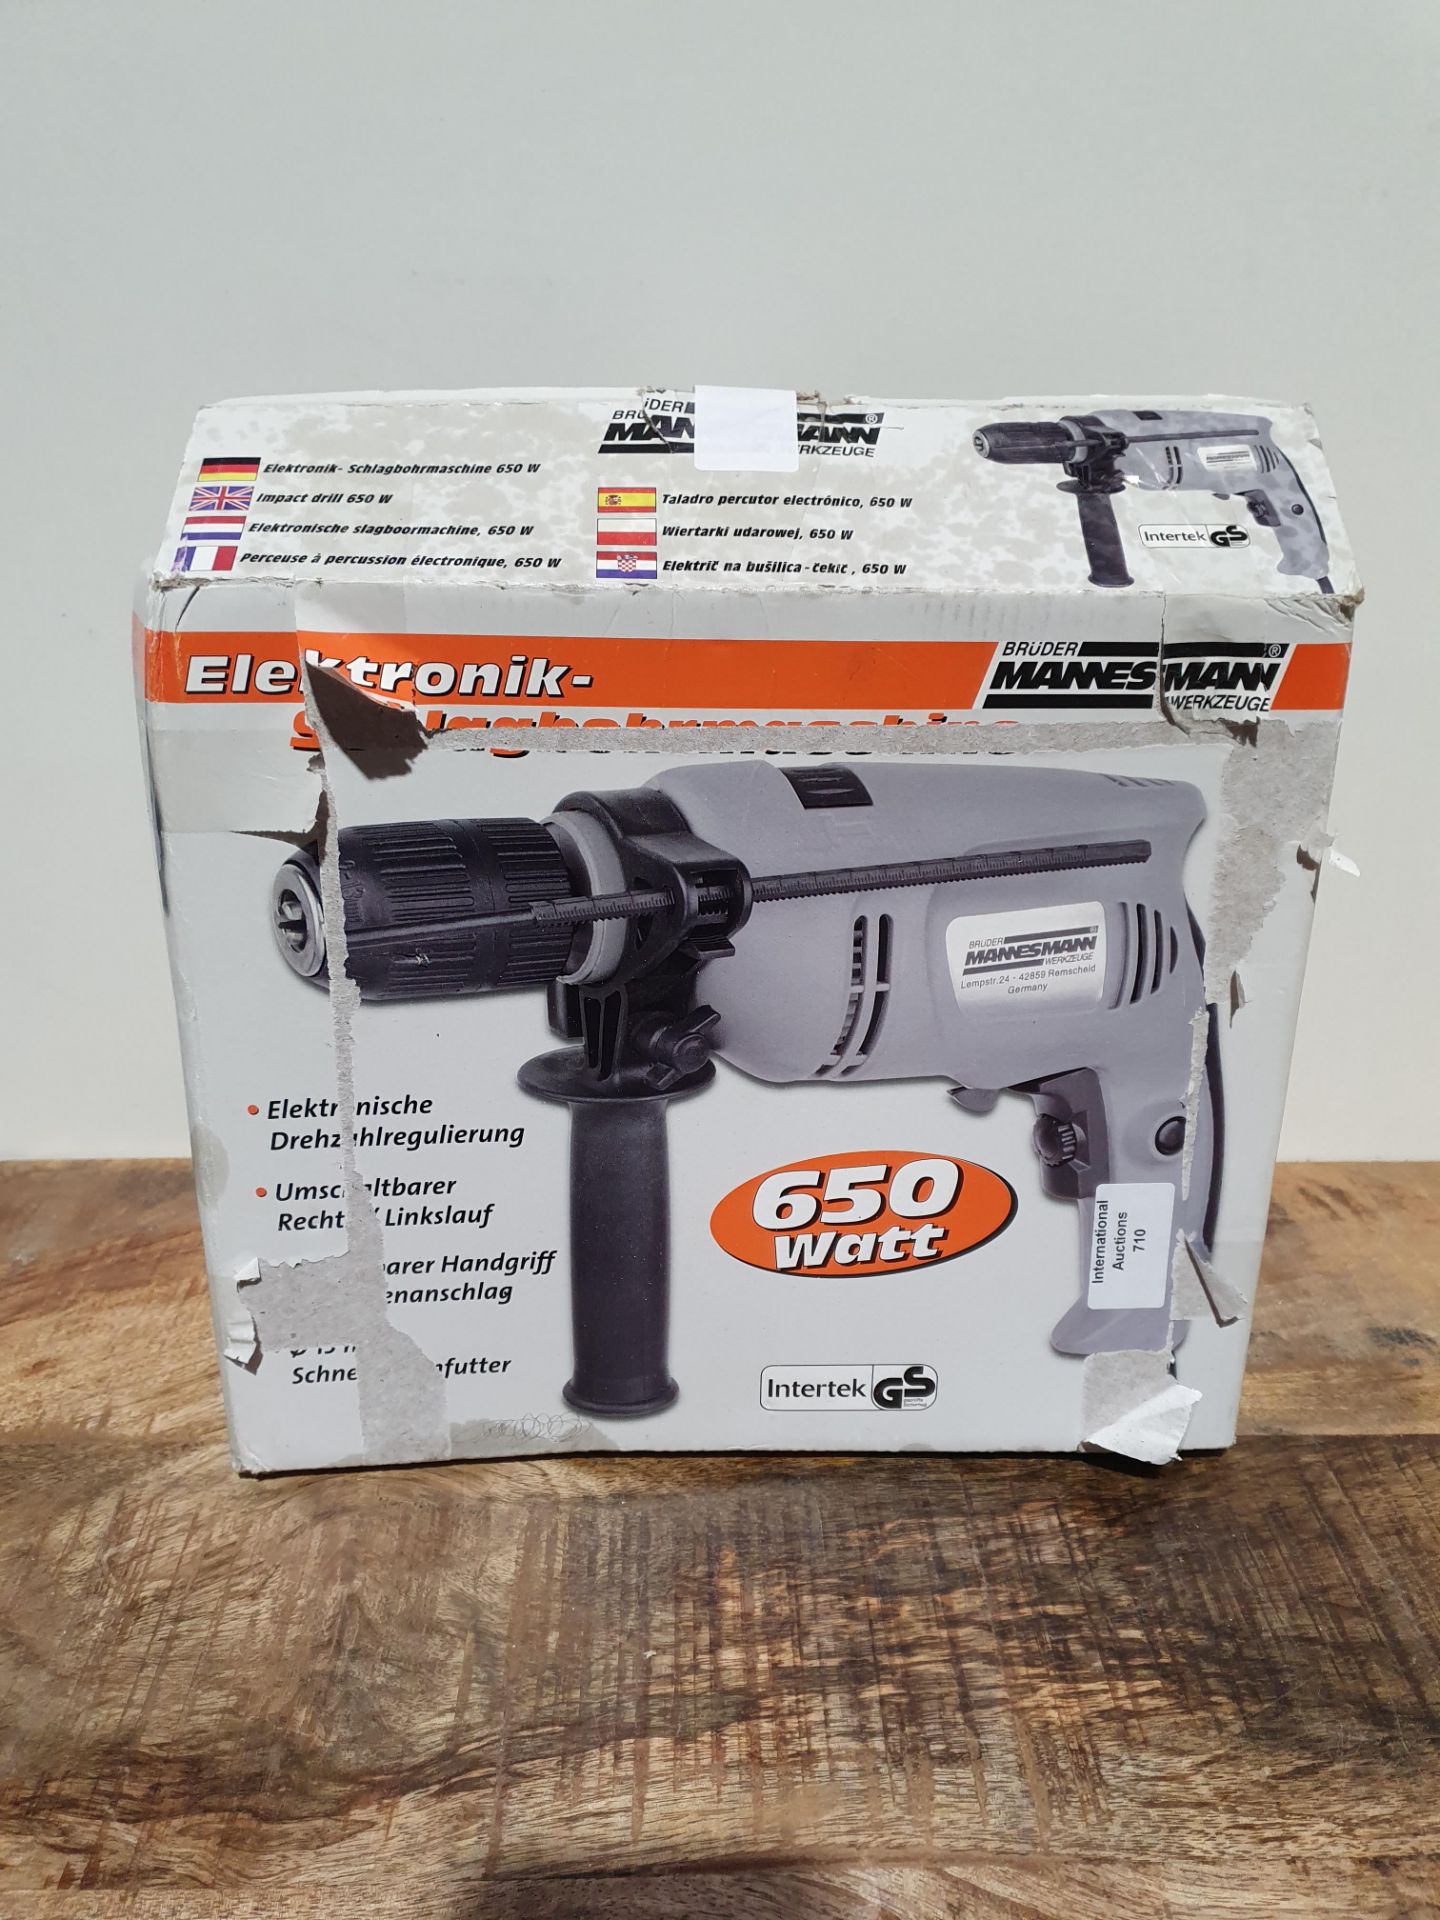 Brothers Mannesmann impact drill 650 RRP £26 Condition ReportAppraisal Available on Request - All